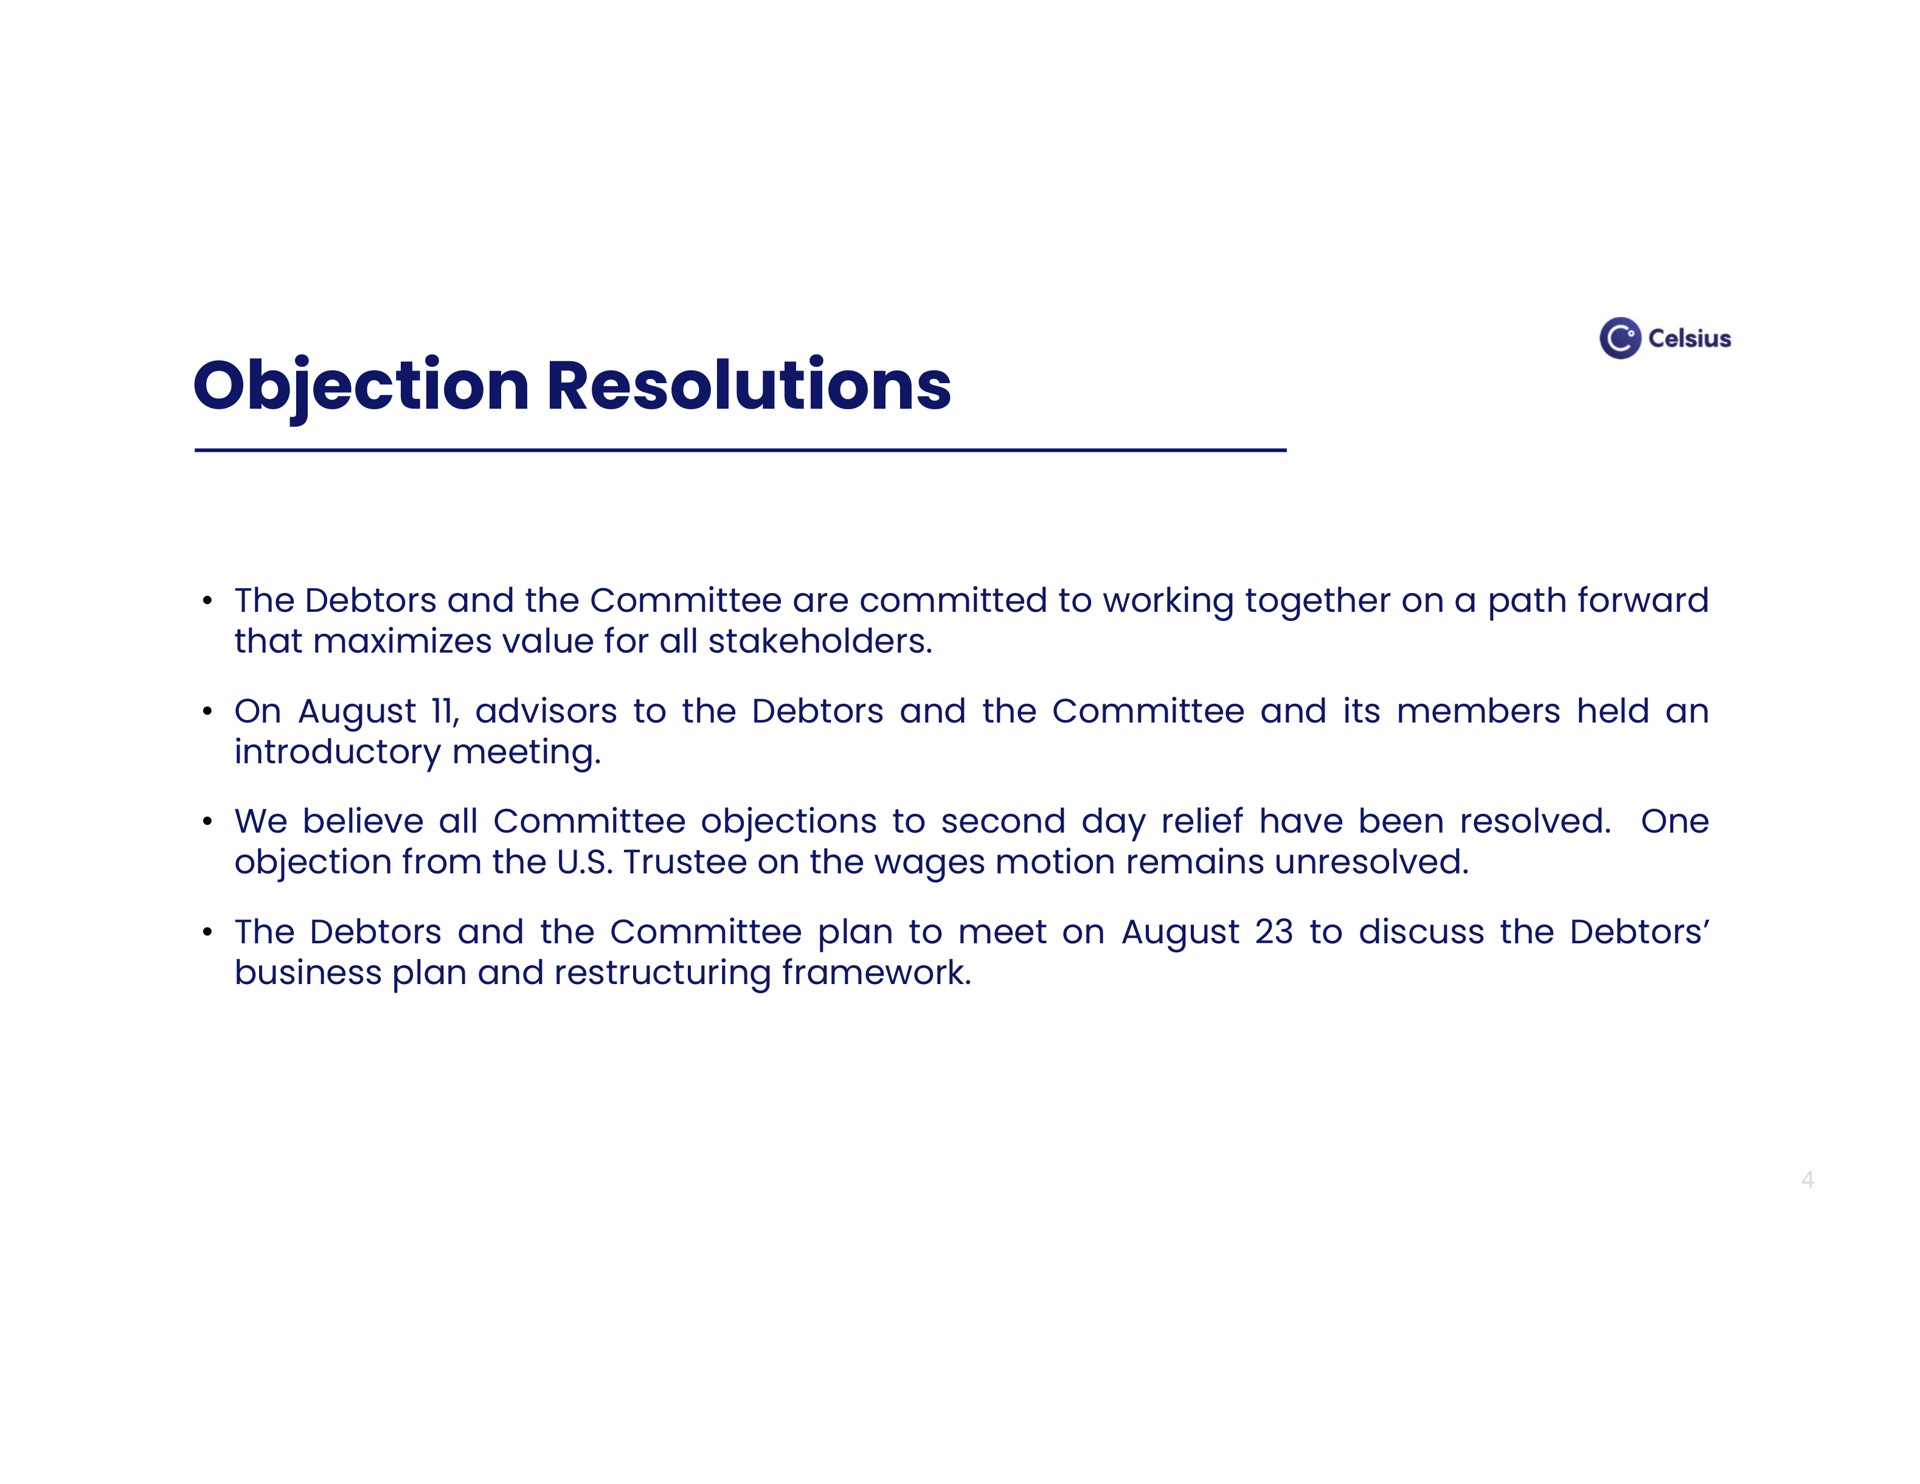 objection resolutions | Celsius Holdings